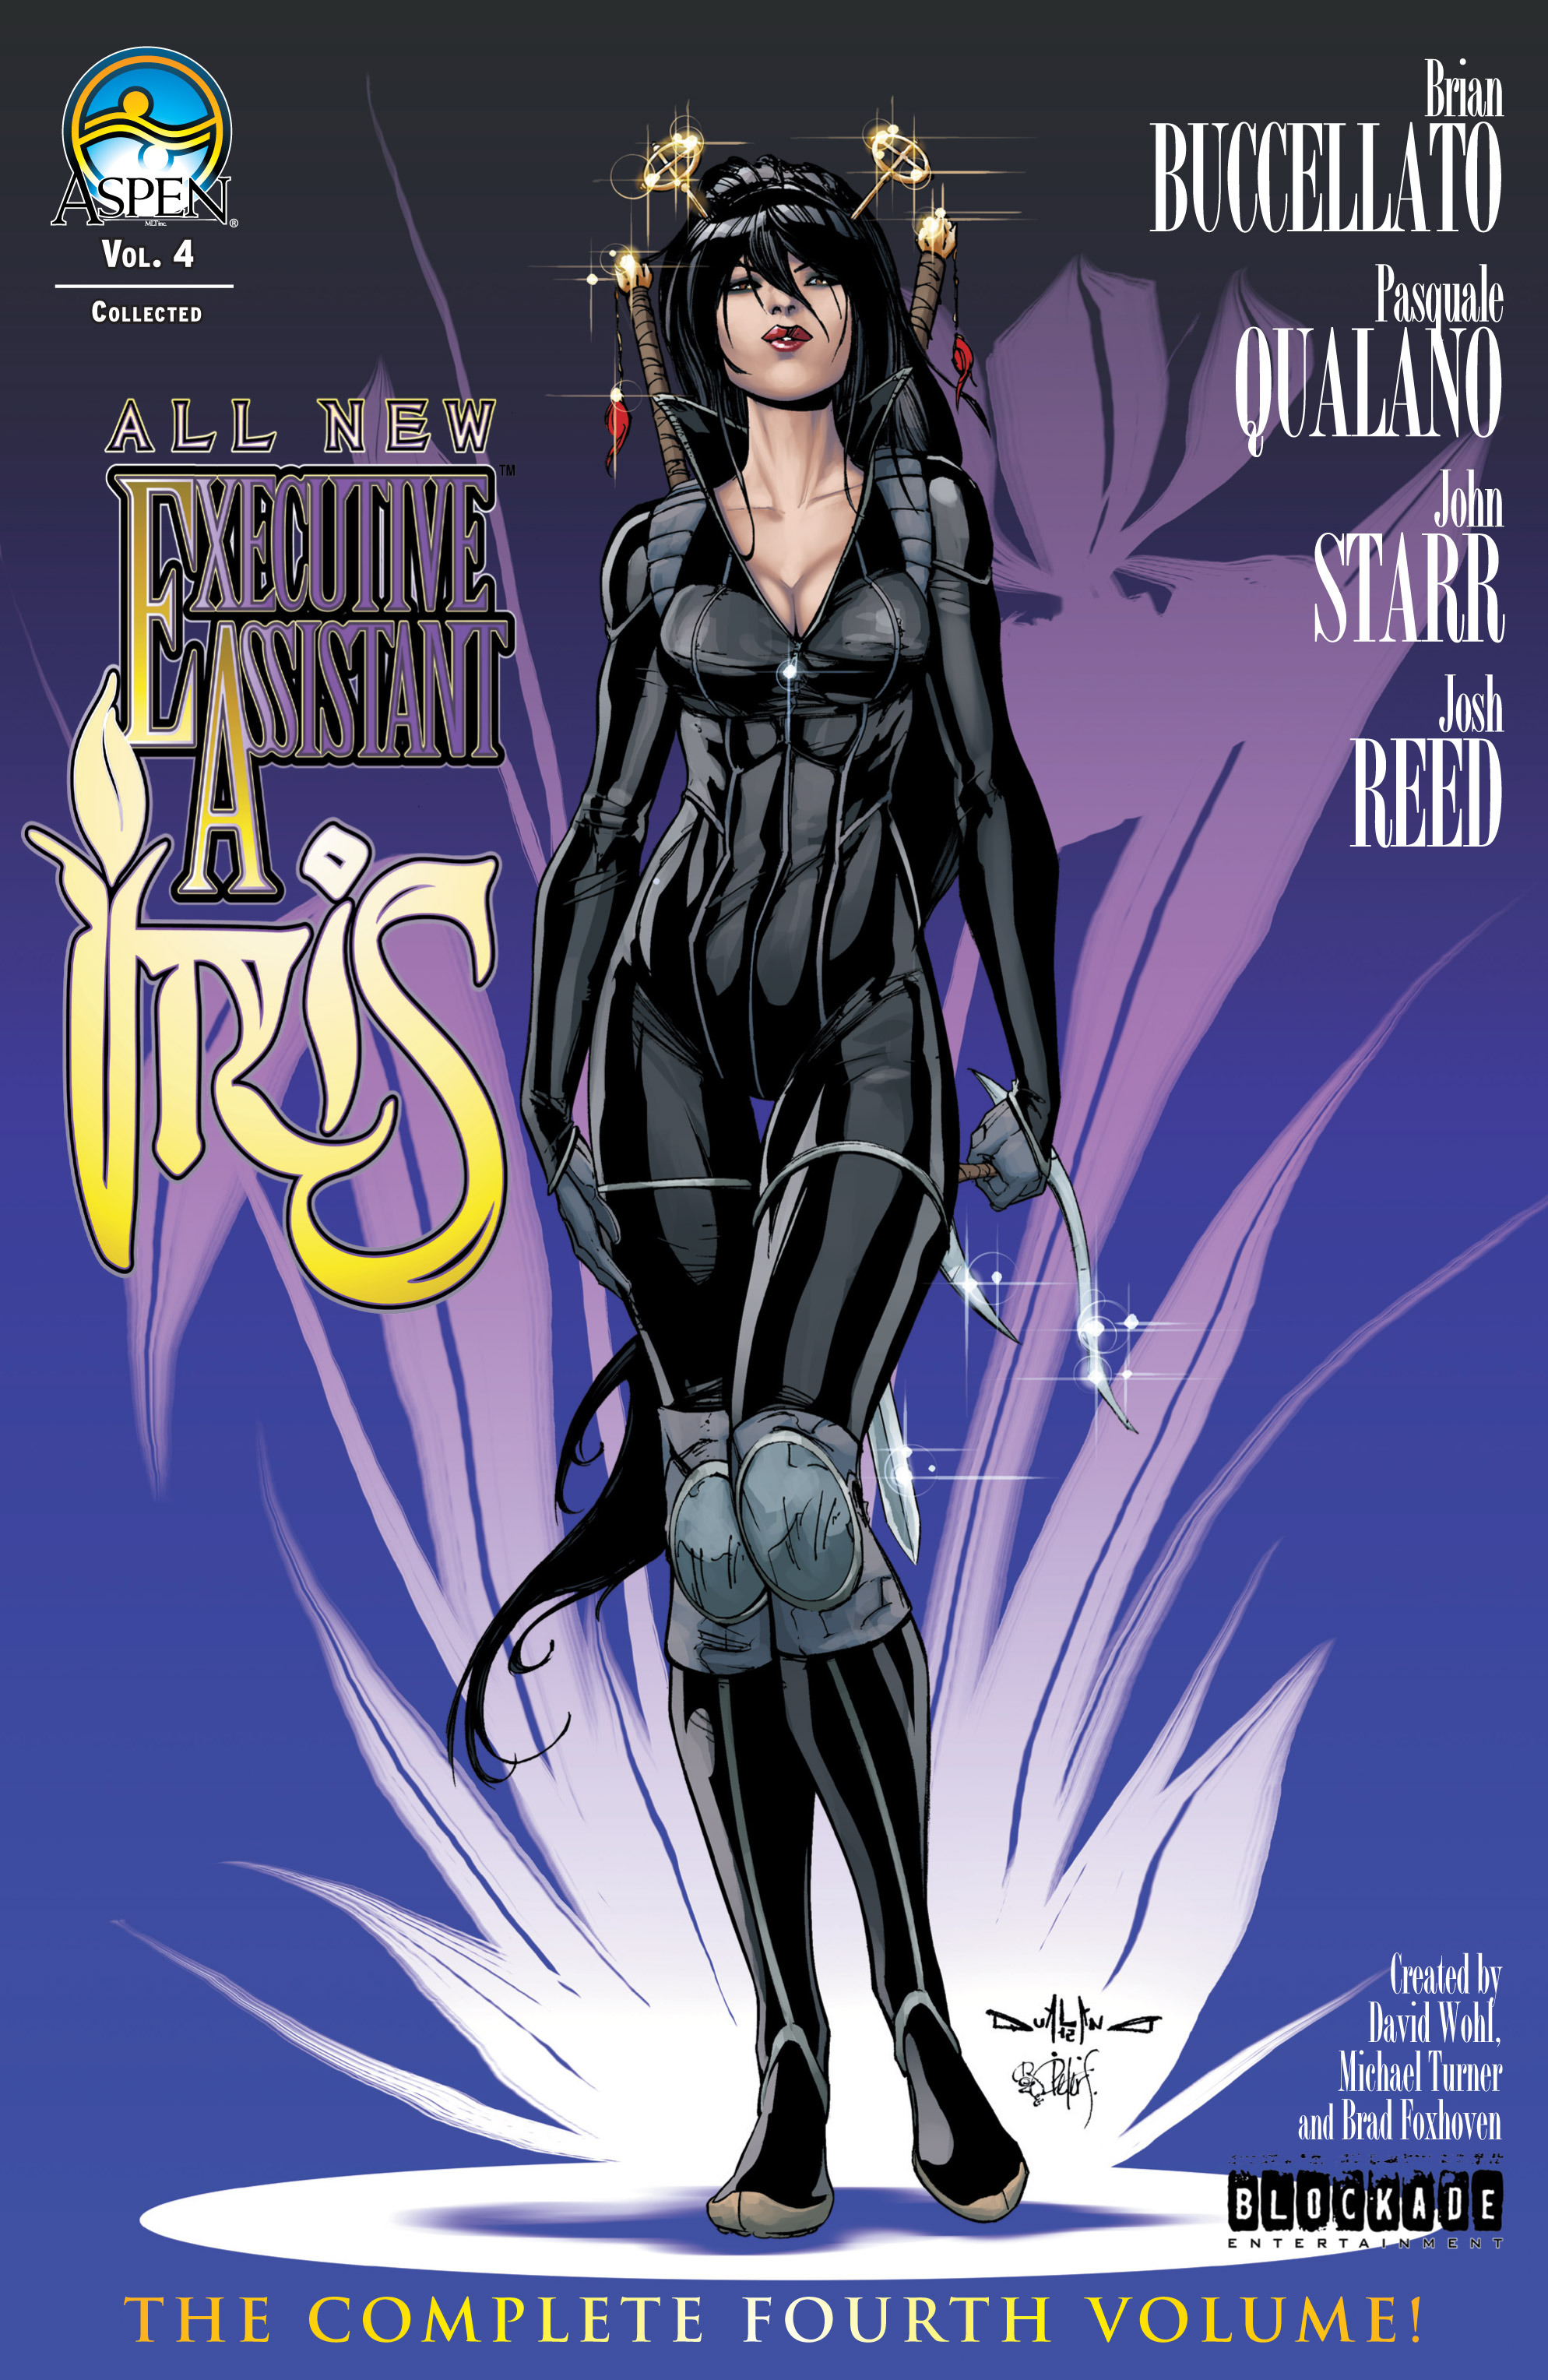 Read online All New Executive Assistant: Iris comic -  Issue # TPB - 1